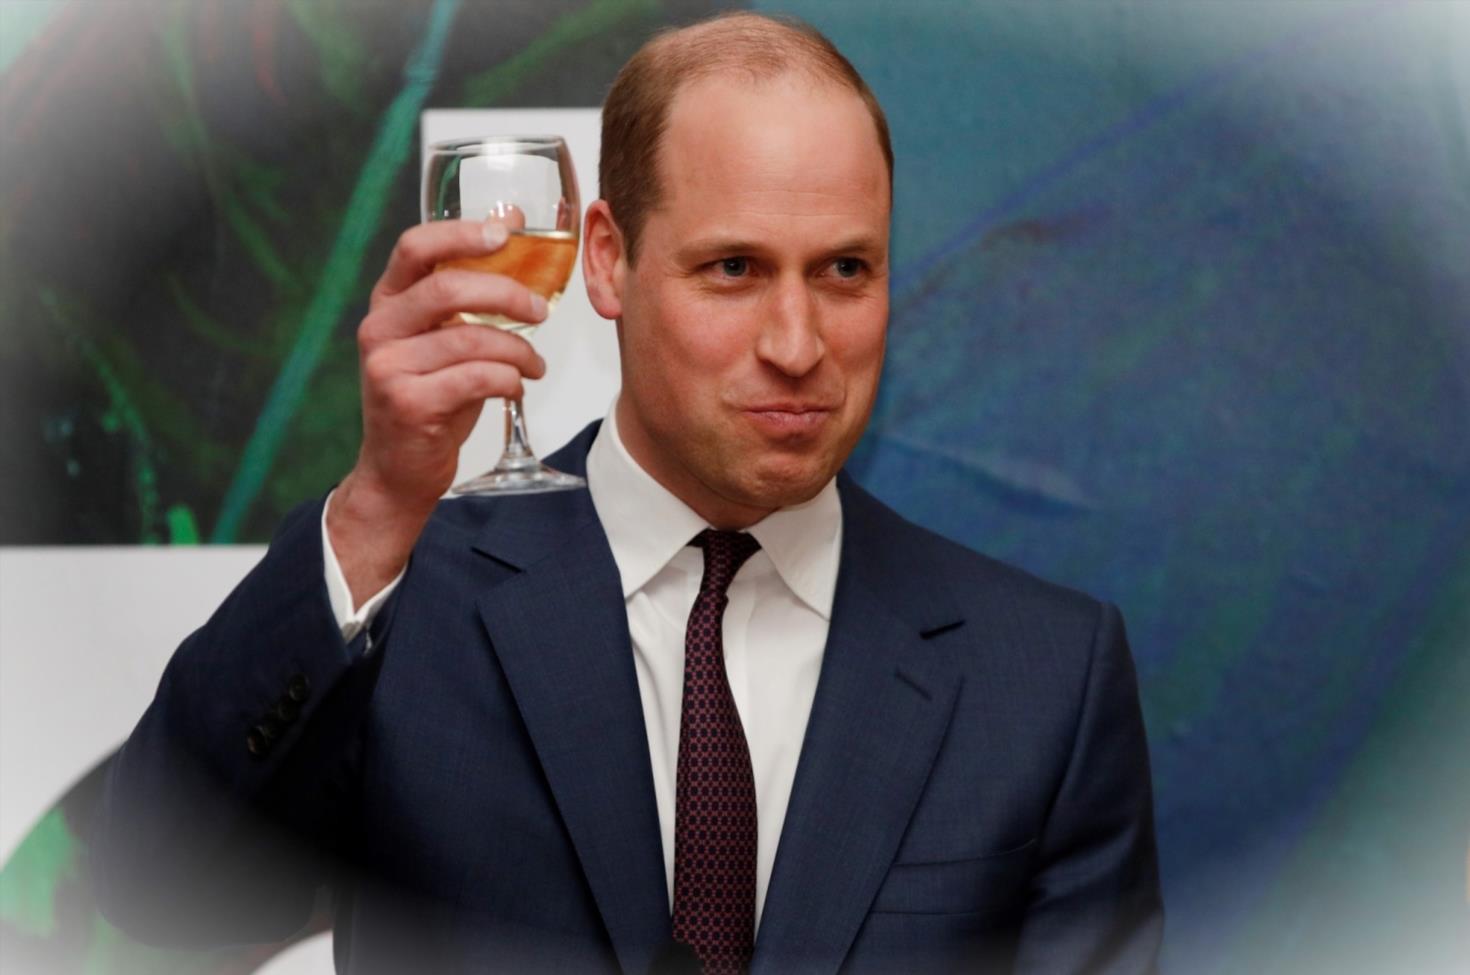 Prince William to Star in ITV Documentary on Homelessness ProjectGneBR 1